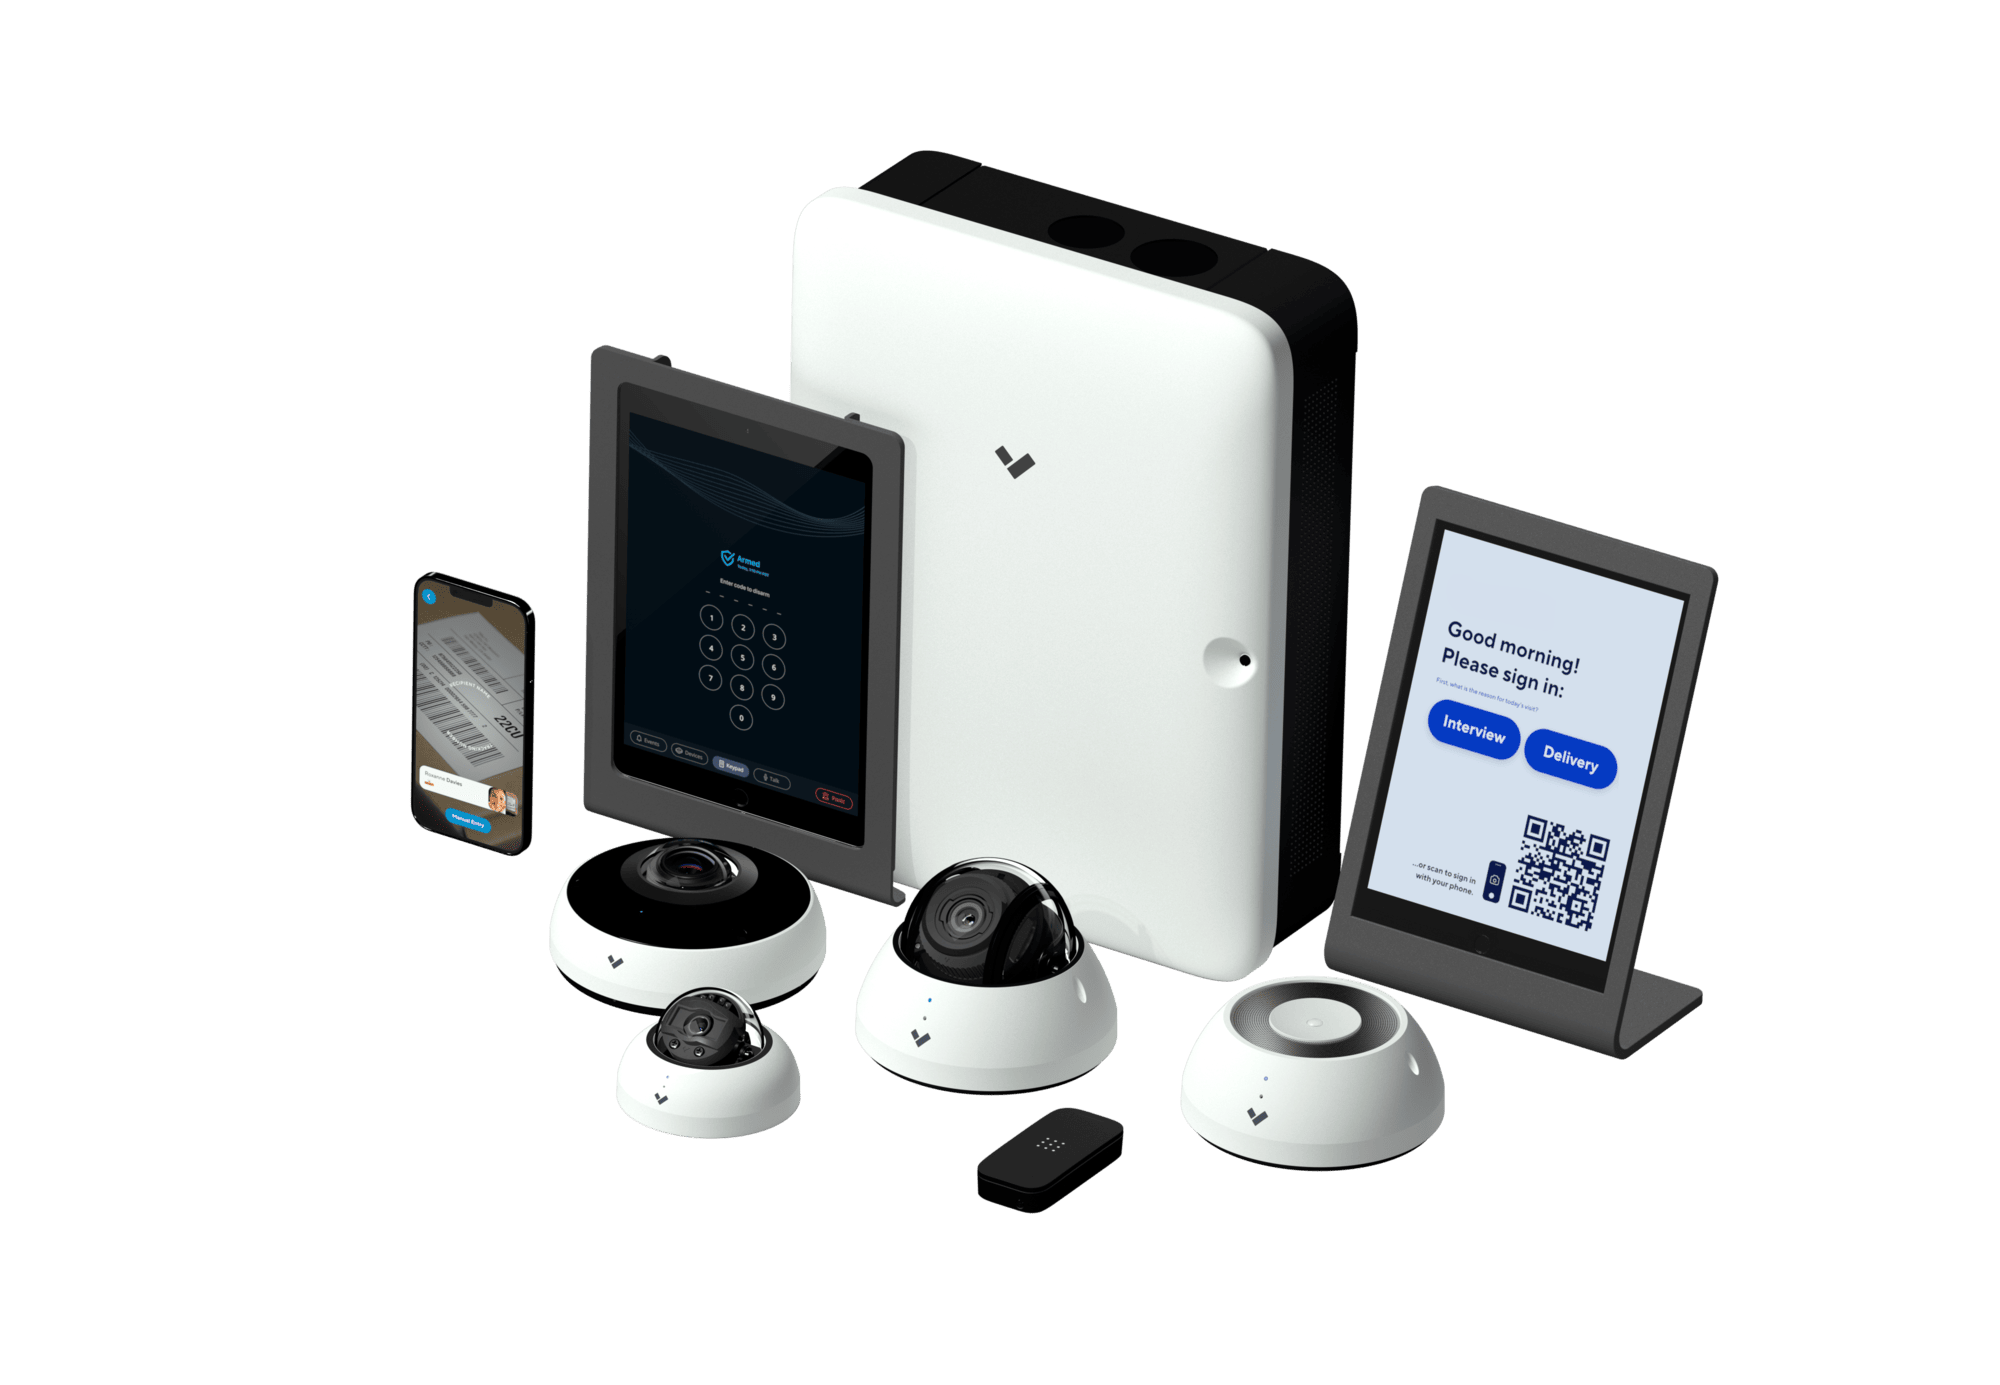 Verkada devices for door access control systems for business